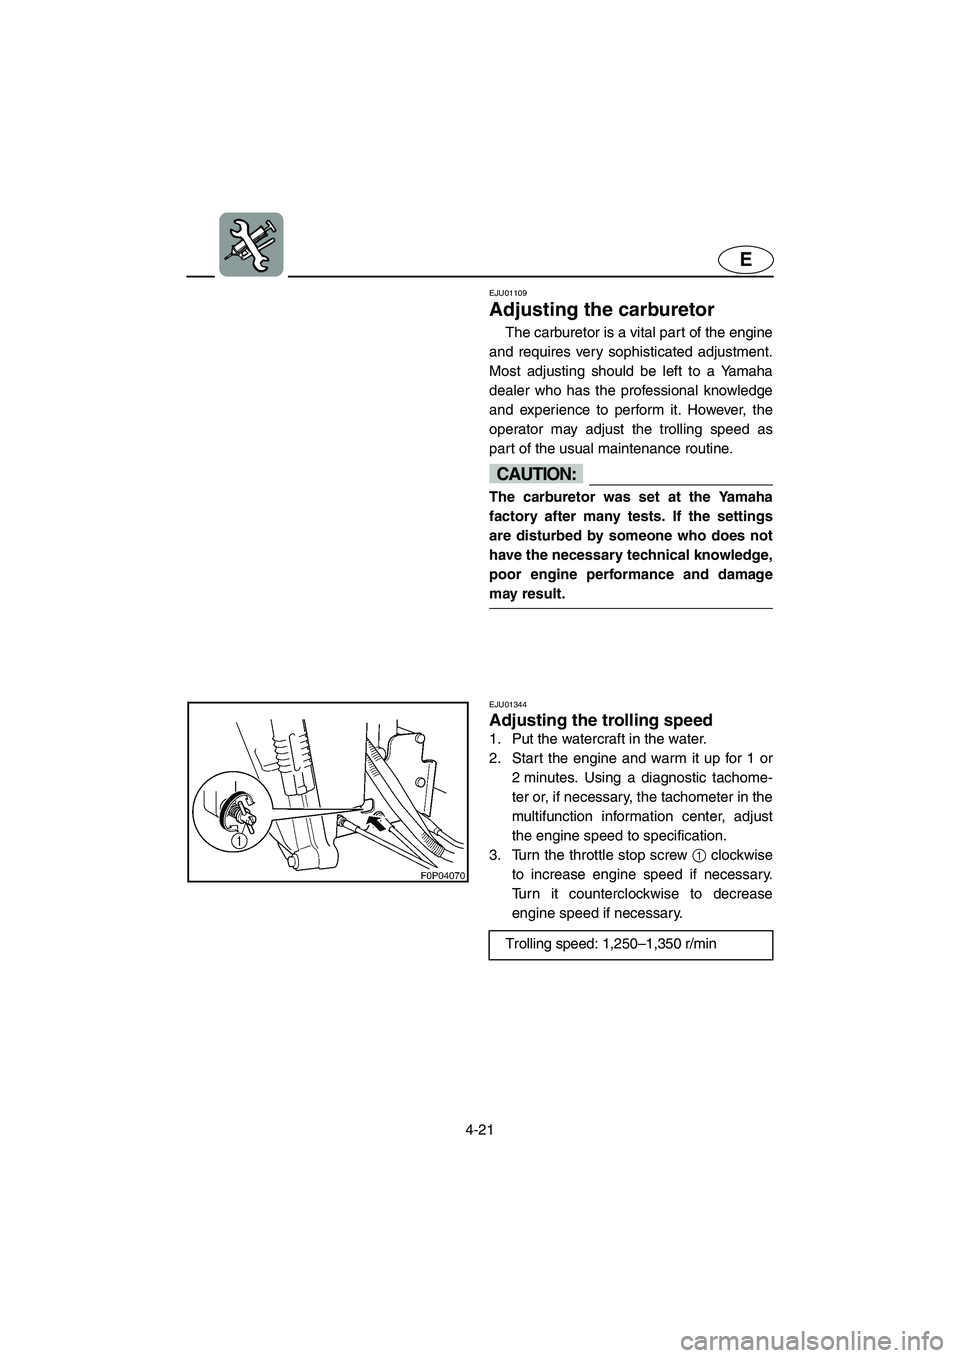 YAMAHA GP800R 2003  Owners Manual 4-21
E
EJU01109 
Adjusting the carburetor  
The carburetor is a vital part of the engine
and requires very sophisticated adjustment.
Most adjusting should be left to a Yamaha
dealer who has the profes